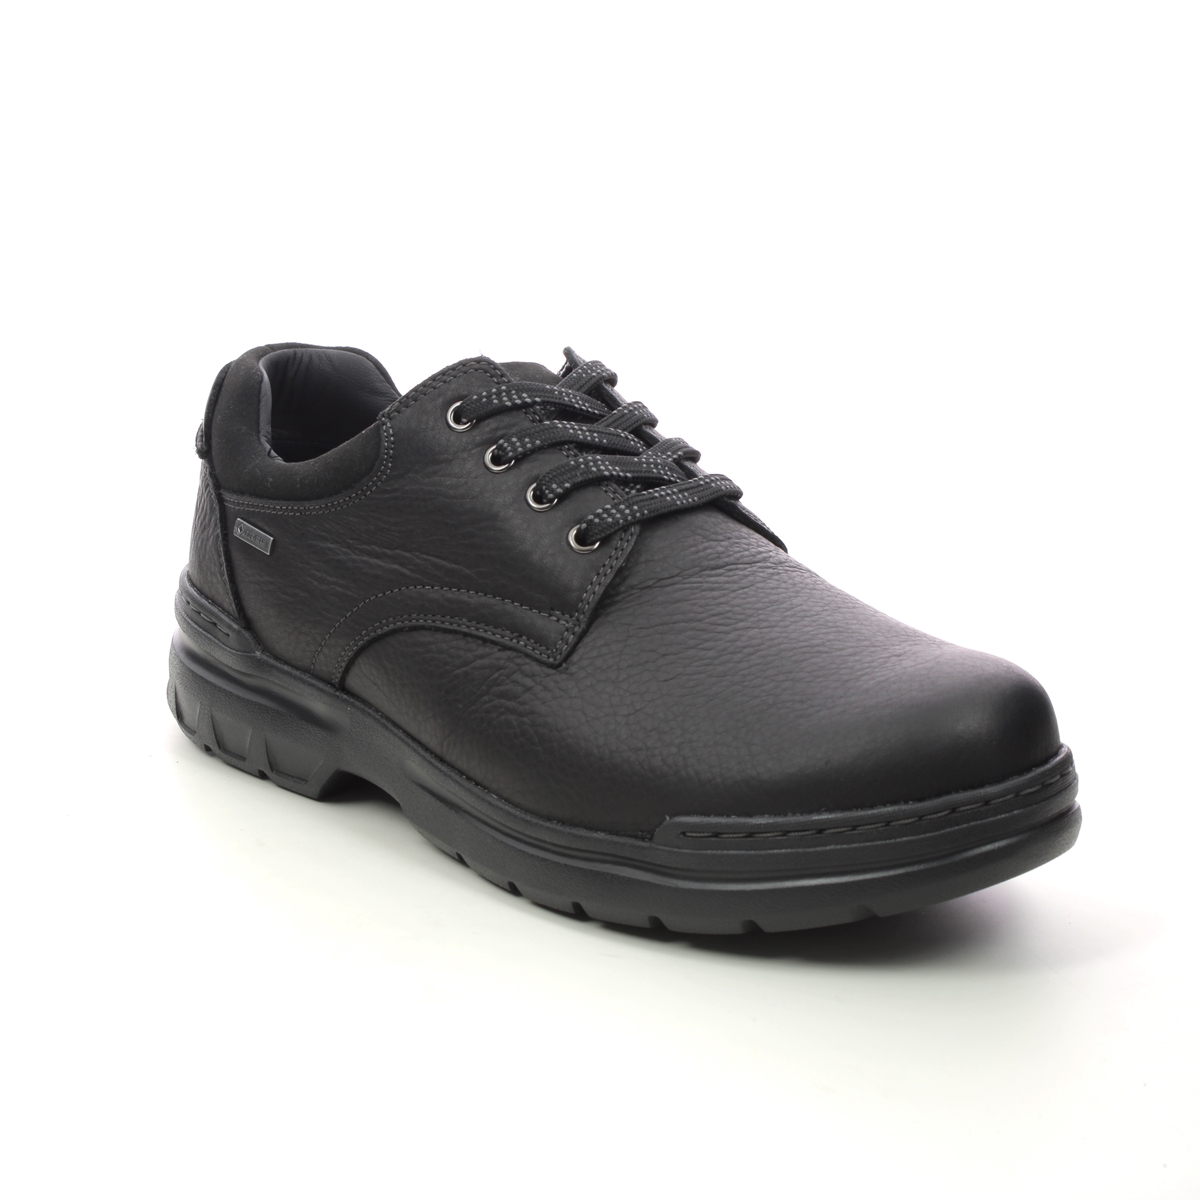 Clarks Rockie Walk Gtx Black Leather Mens Comfort Shoes 734648H In Size 9 In Plain Black Leather H Width Fitting Extra Wide